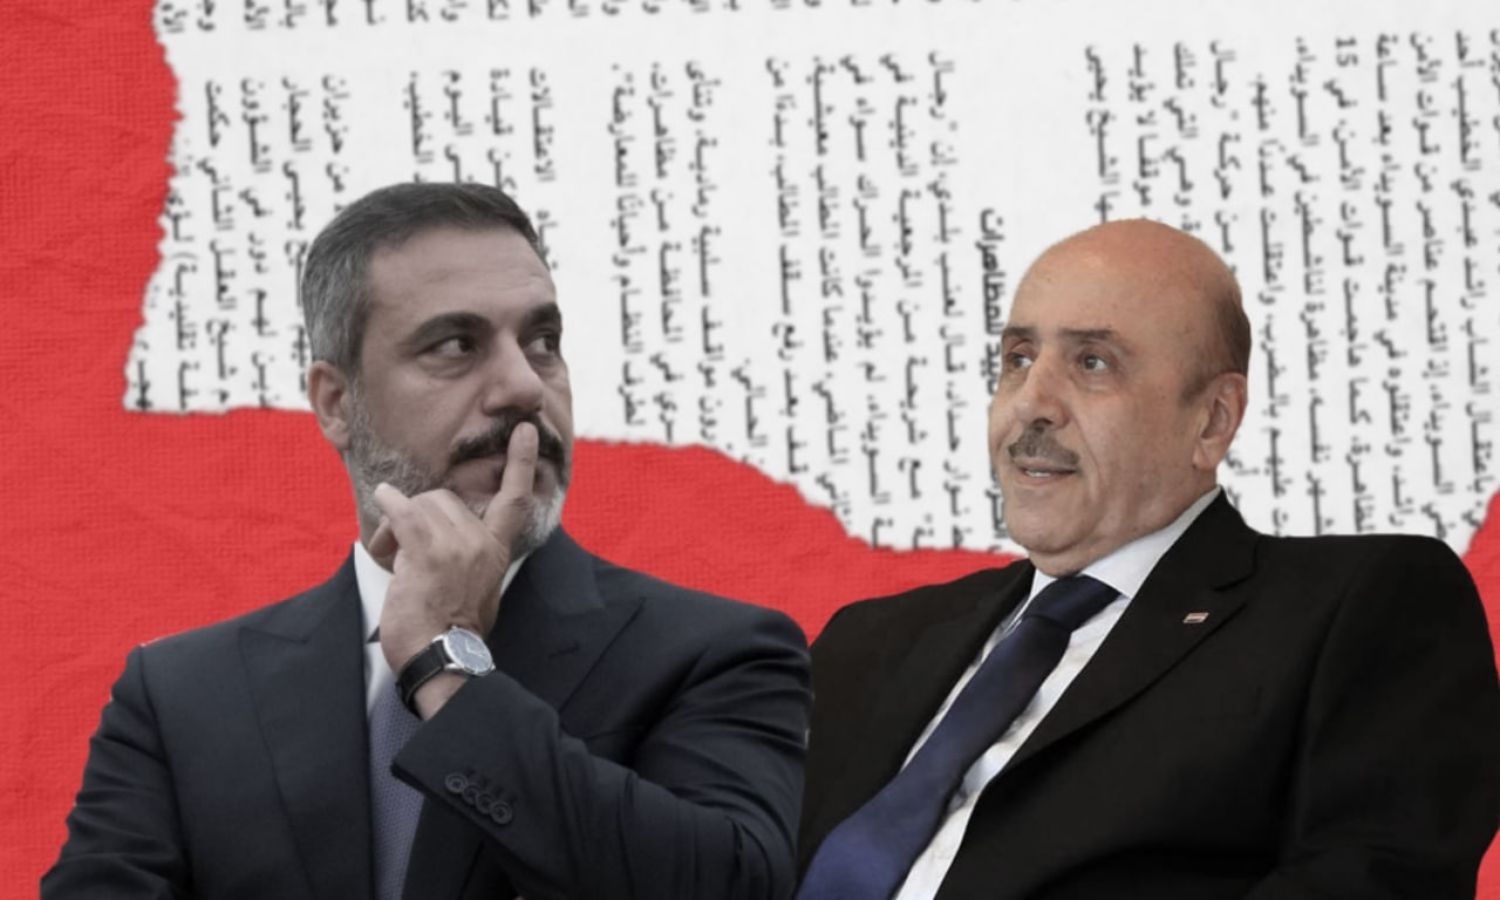 Director of the National Security Office in Syria, Ali Mamlouk, and head of Turkish intelligence, Hakan Fidan - (modified by Enab Baladi)